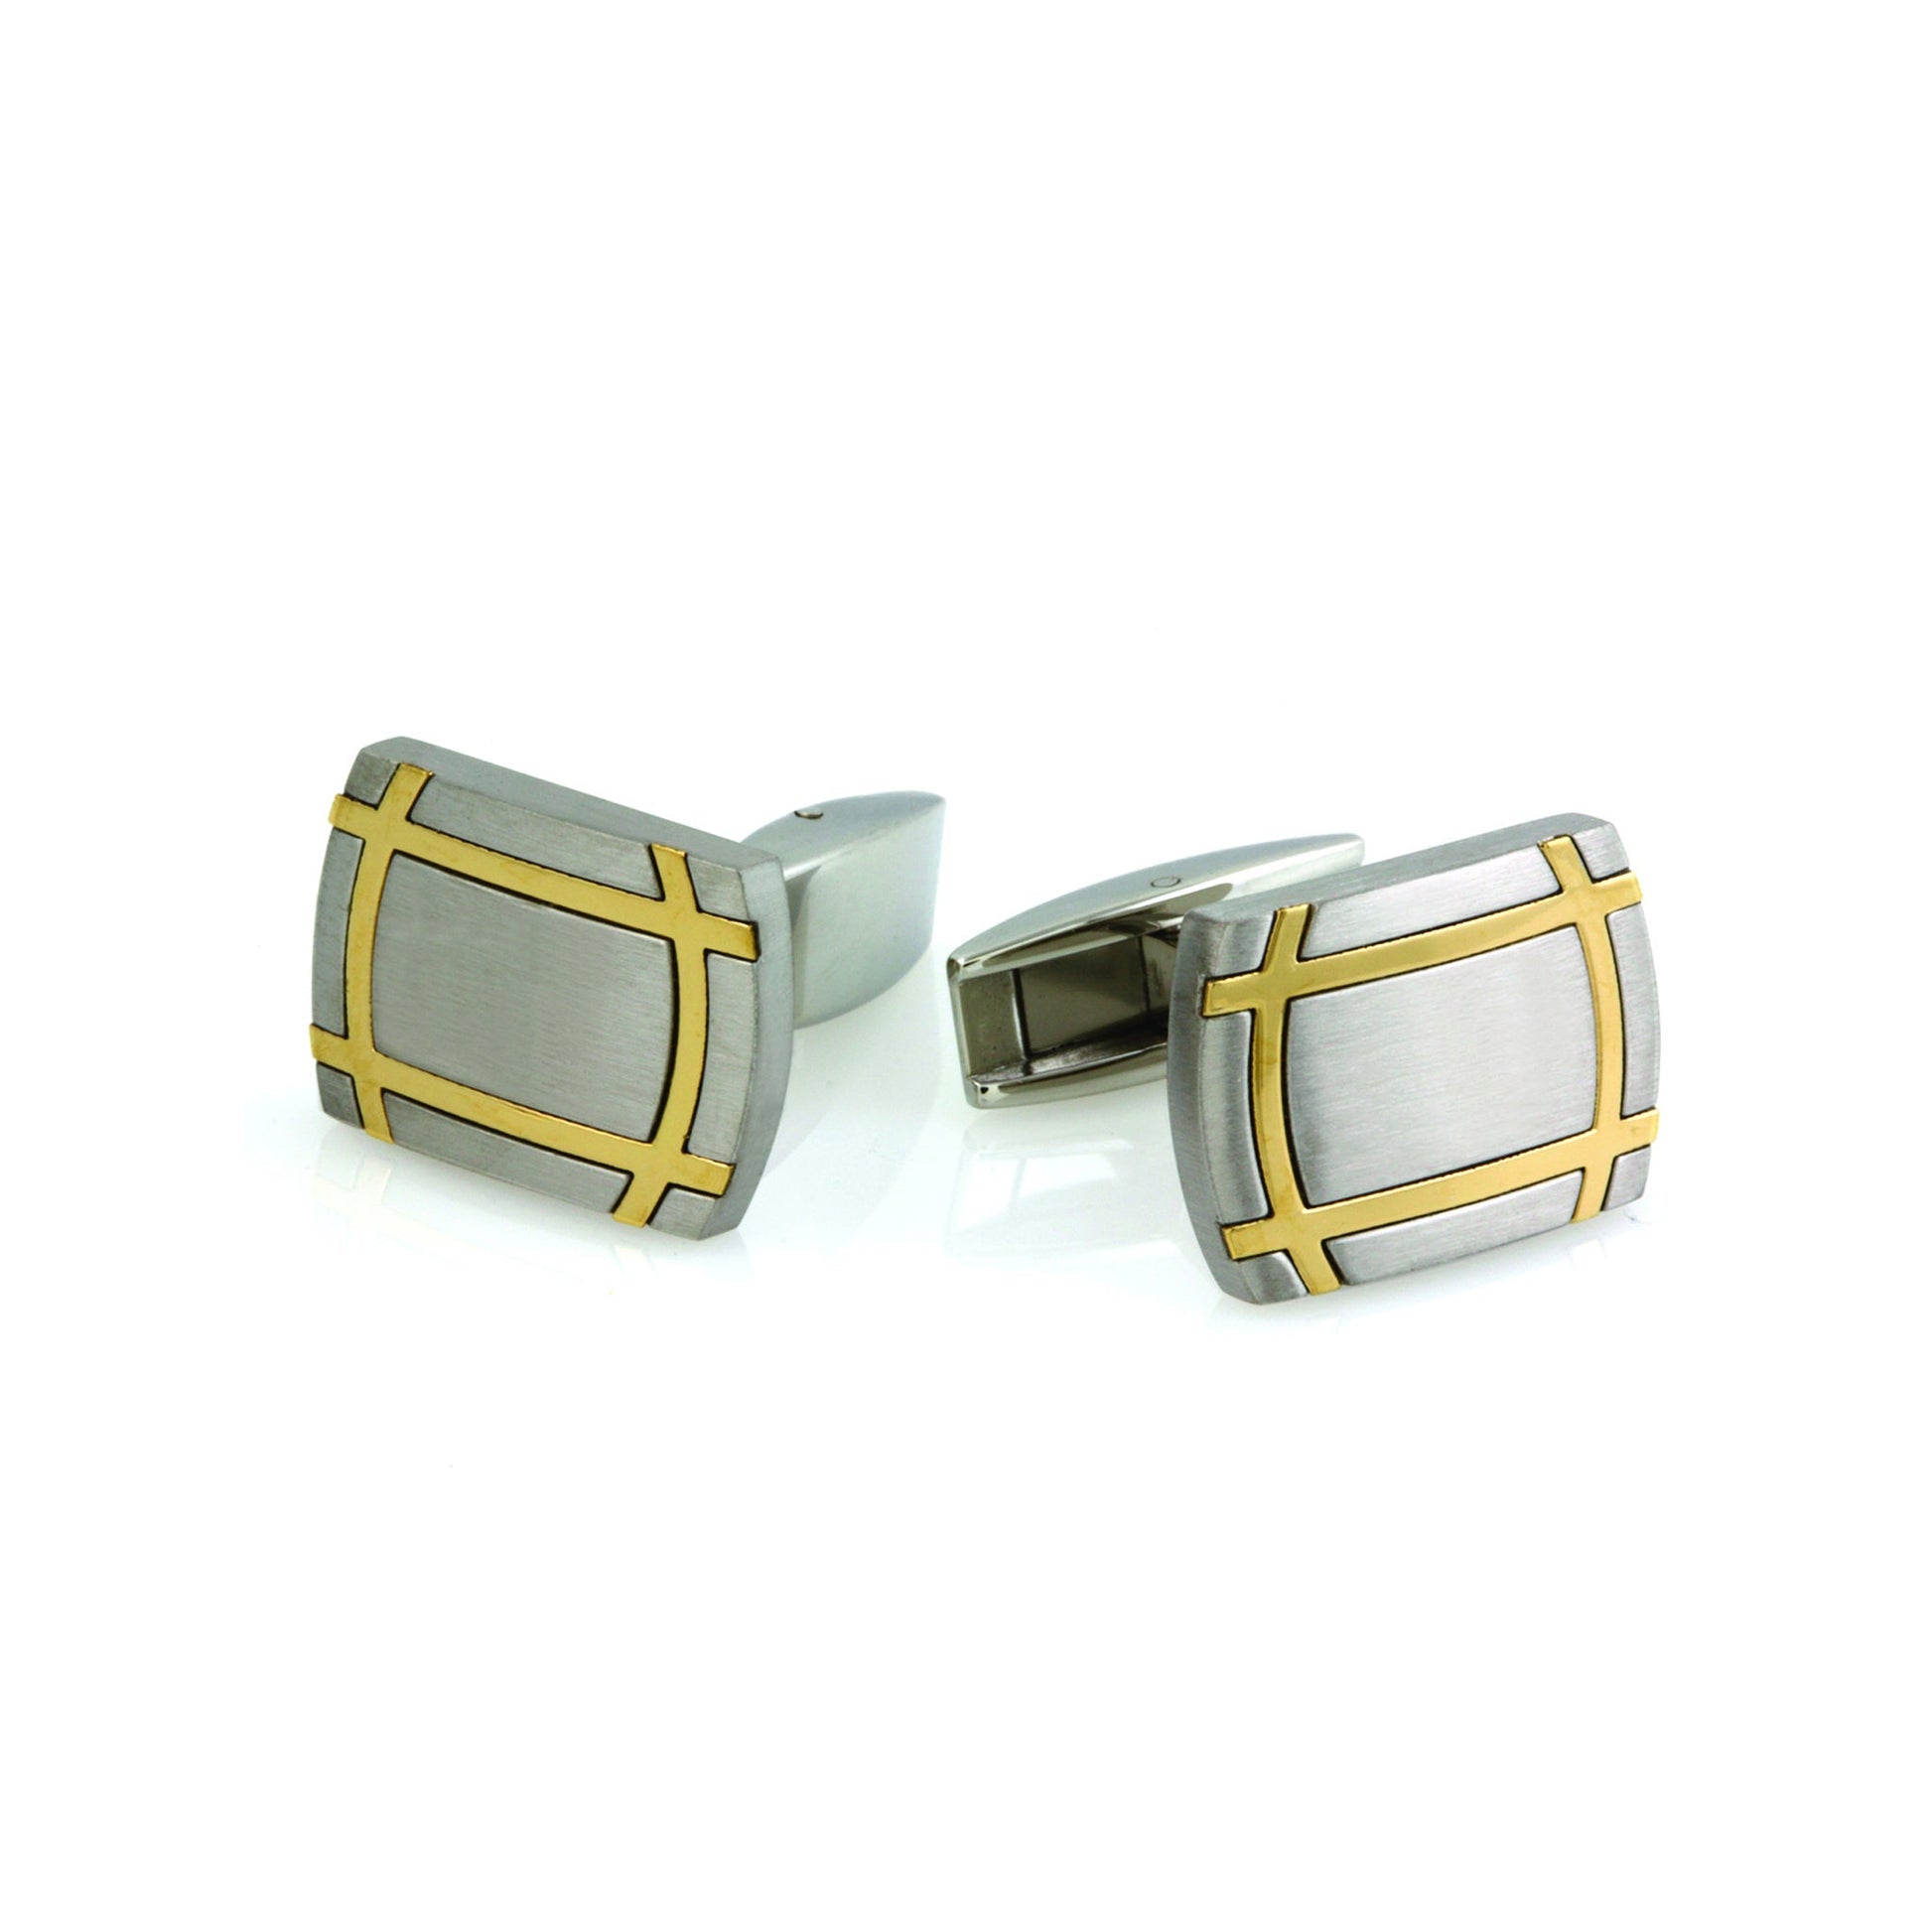 A stainless steel satin finish cufflinks with gold-tone geometric displayed on a neutral white background.